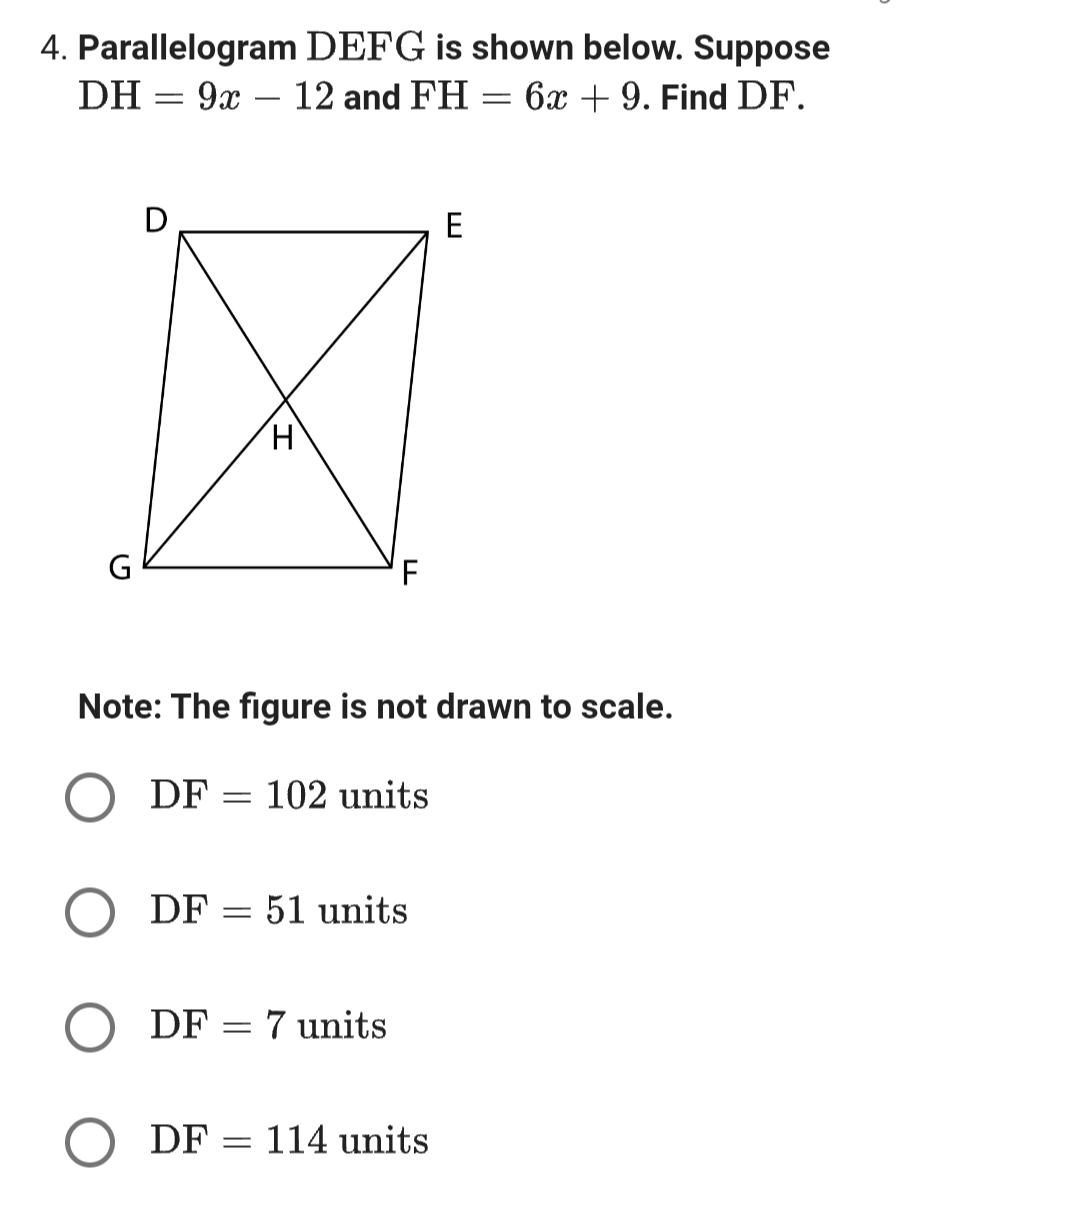 4. Parallelogram DEFG is shown below. Suppose
DH = 9x - 12 and FH = 6x + 9. Find DF.
-
G
D
H
Note: The figure is not drawn to scale.
DF: = 102 units
DF 51 units
=
DF 7 units
=
E
DF 114 units